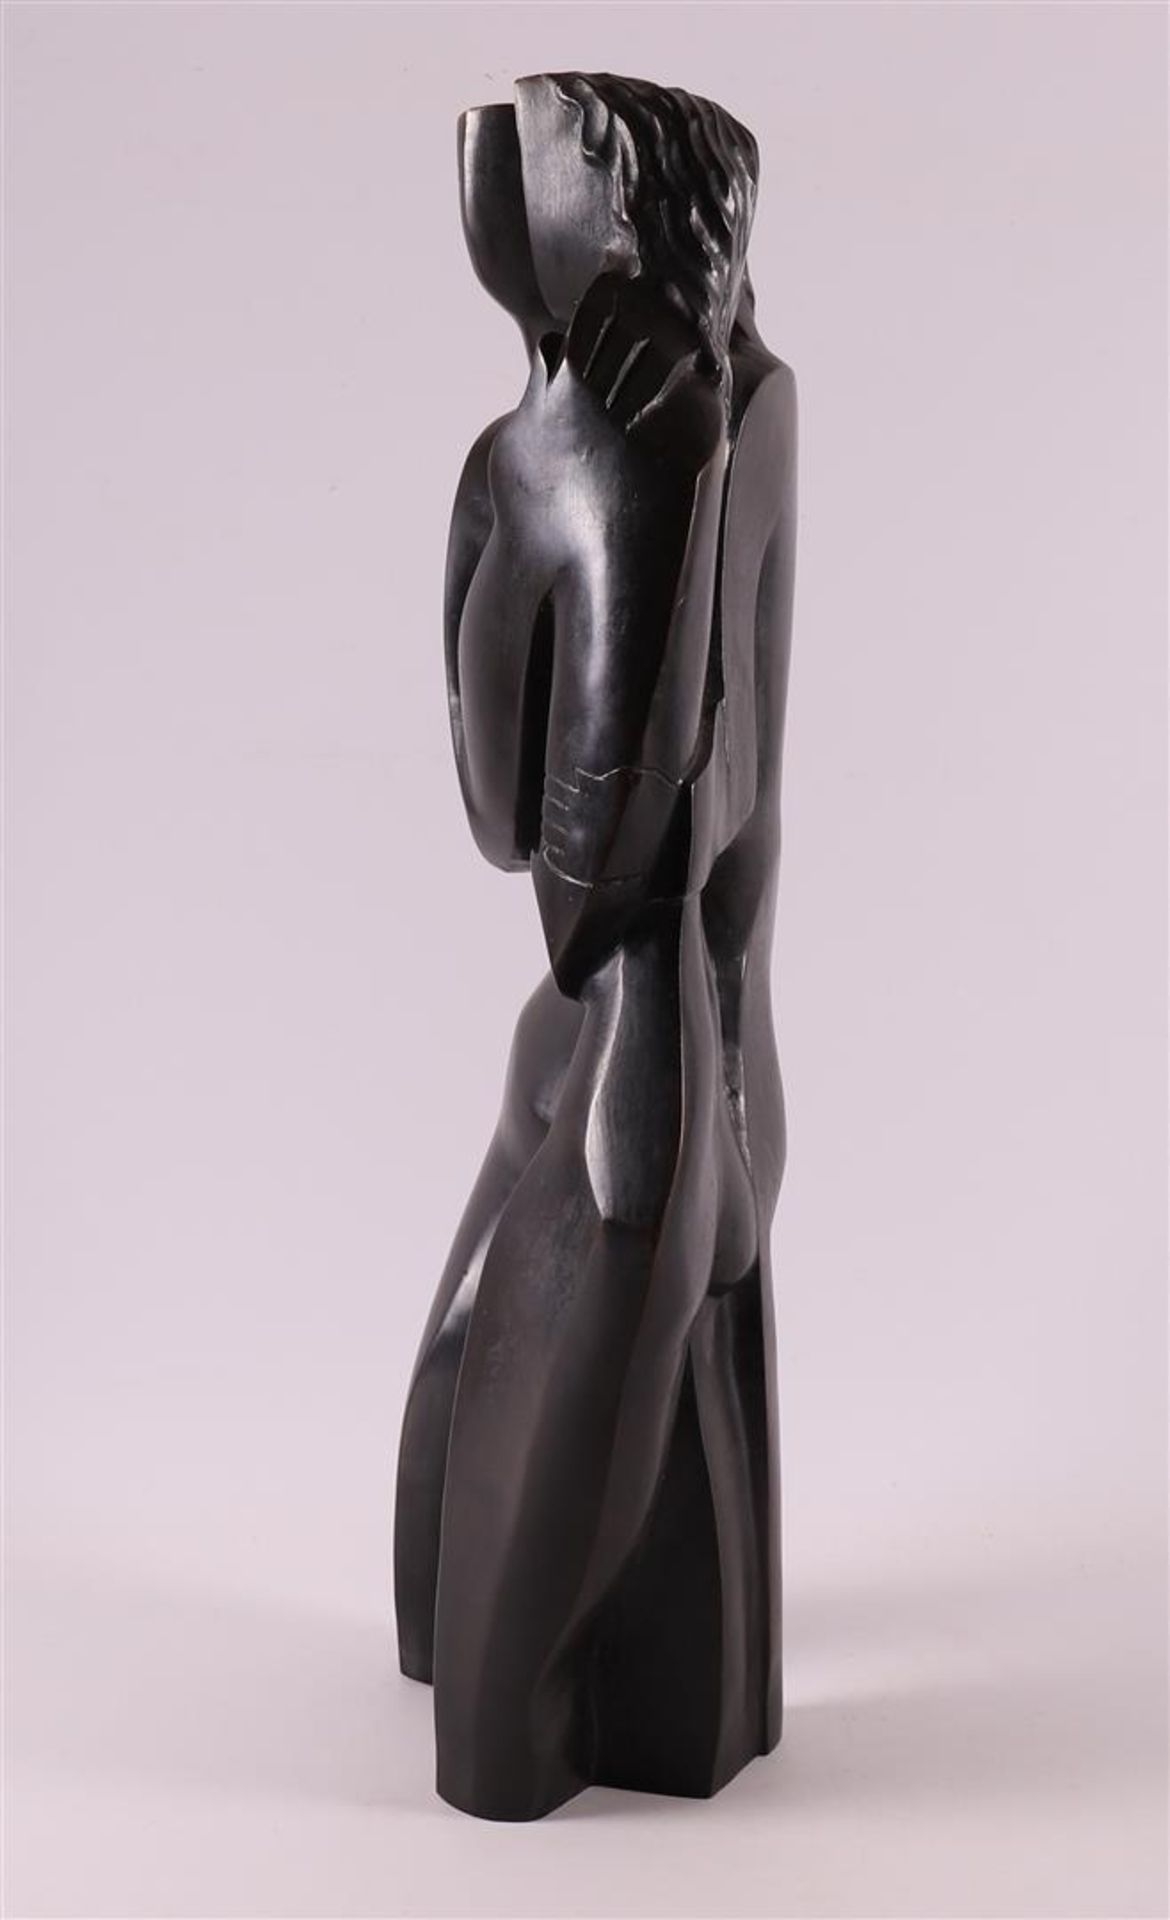 Zadkine, Ossip (1890-1967) 'Intinité', 1949. - Image 6 of 8